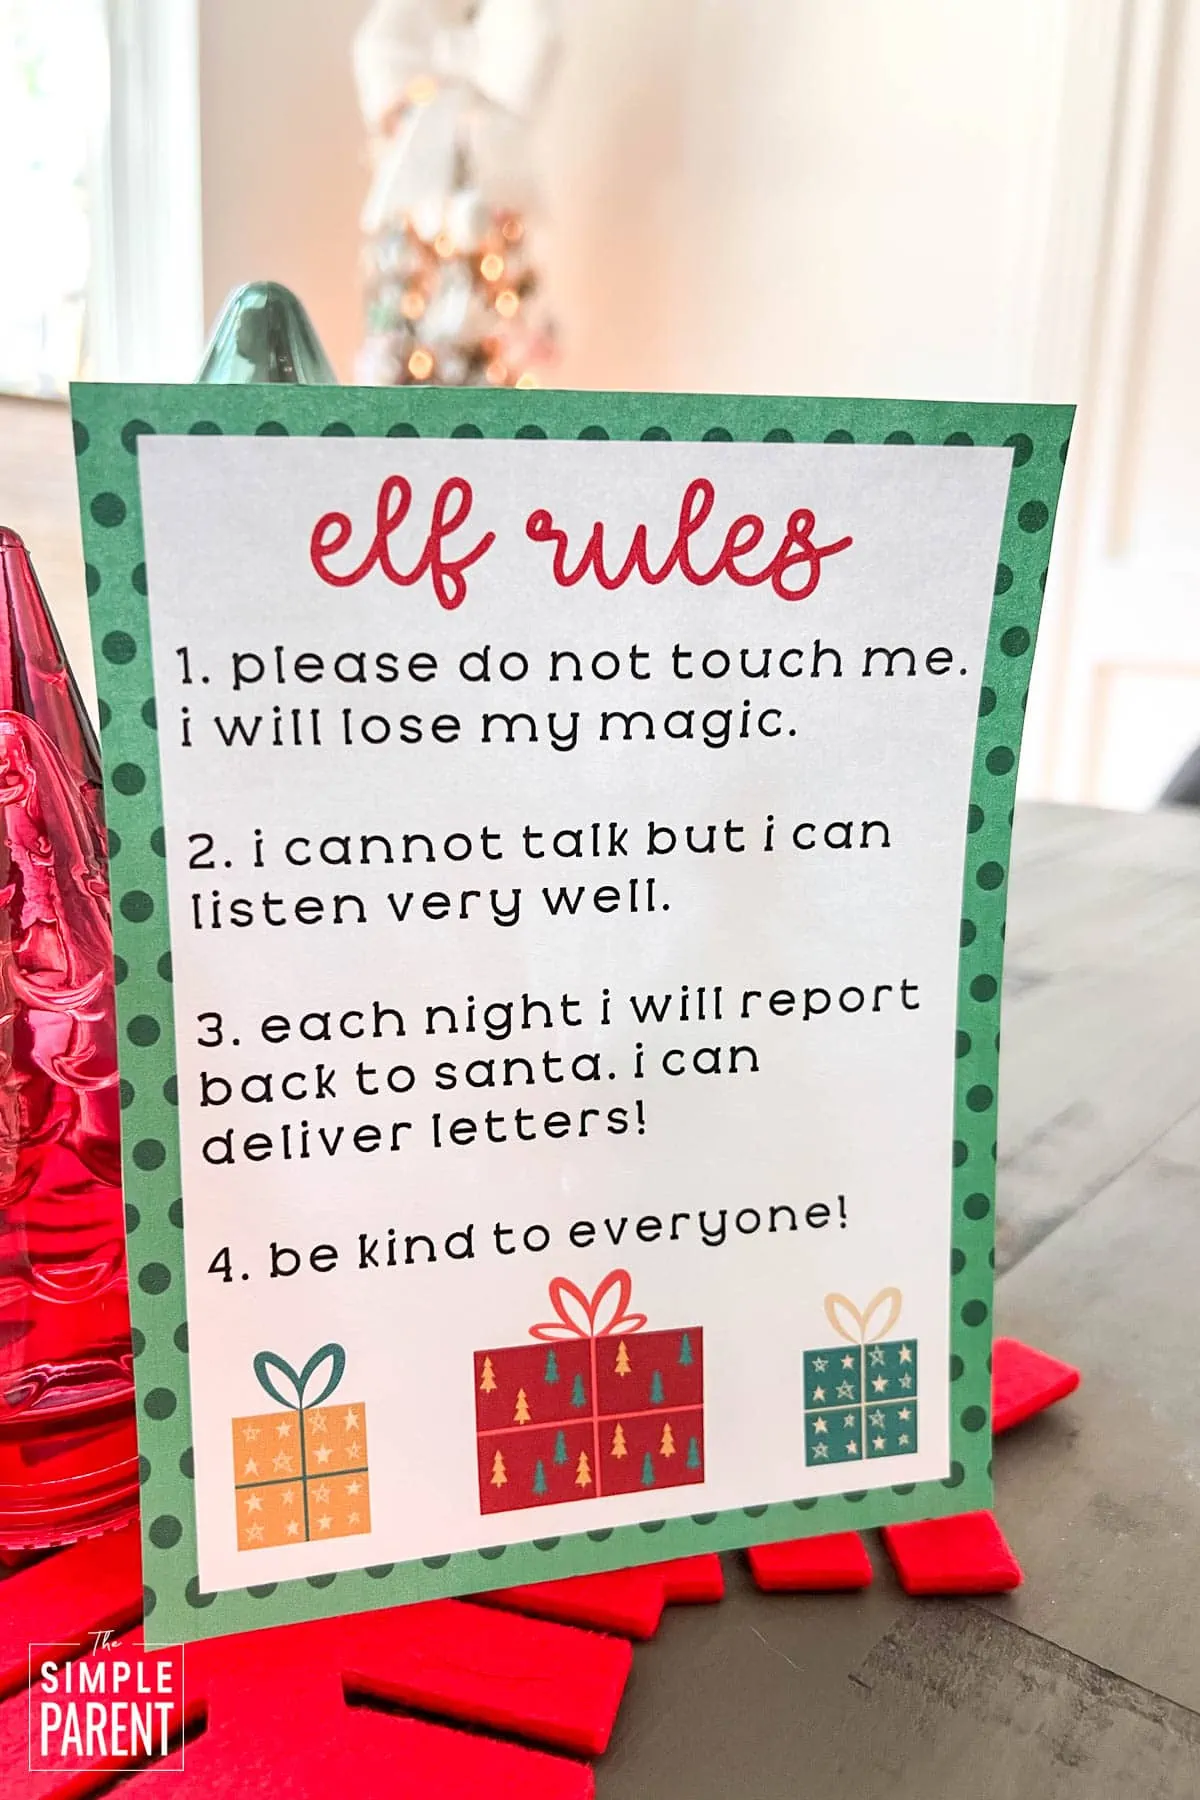 Elf on the Shelf rules printable in front of Christmas tree